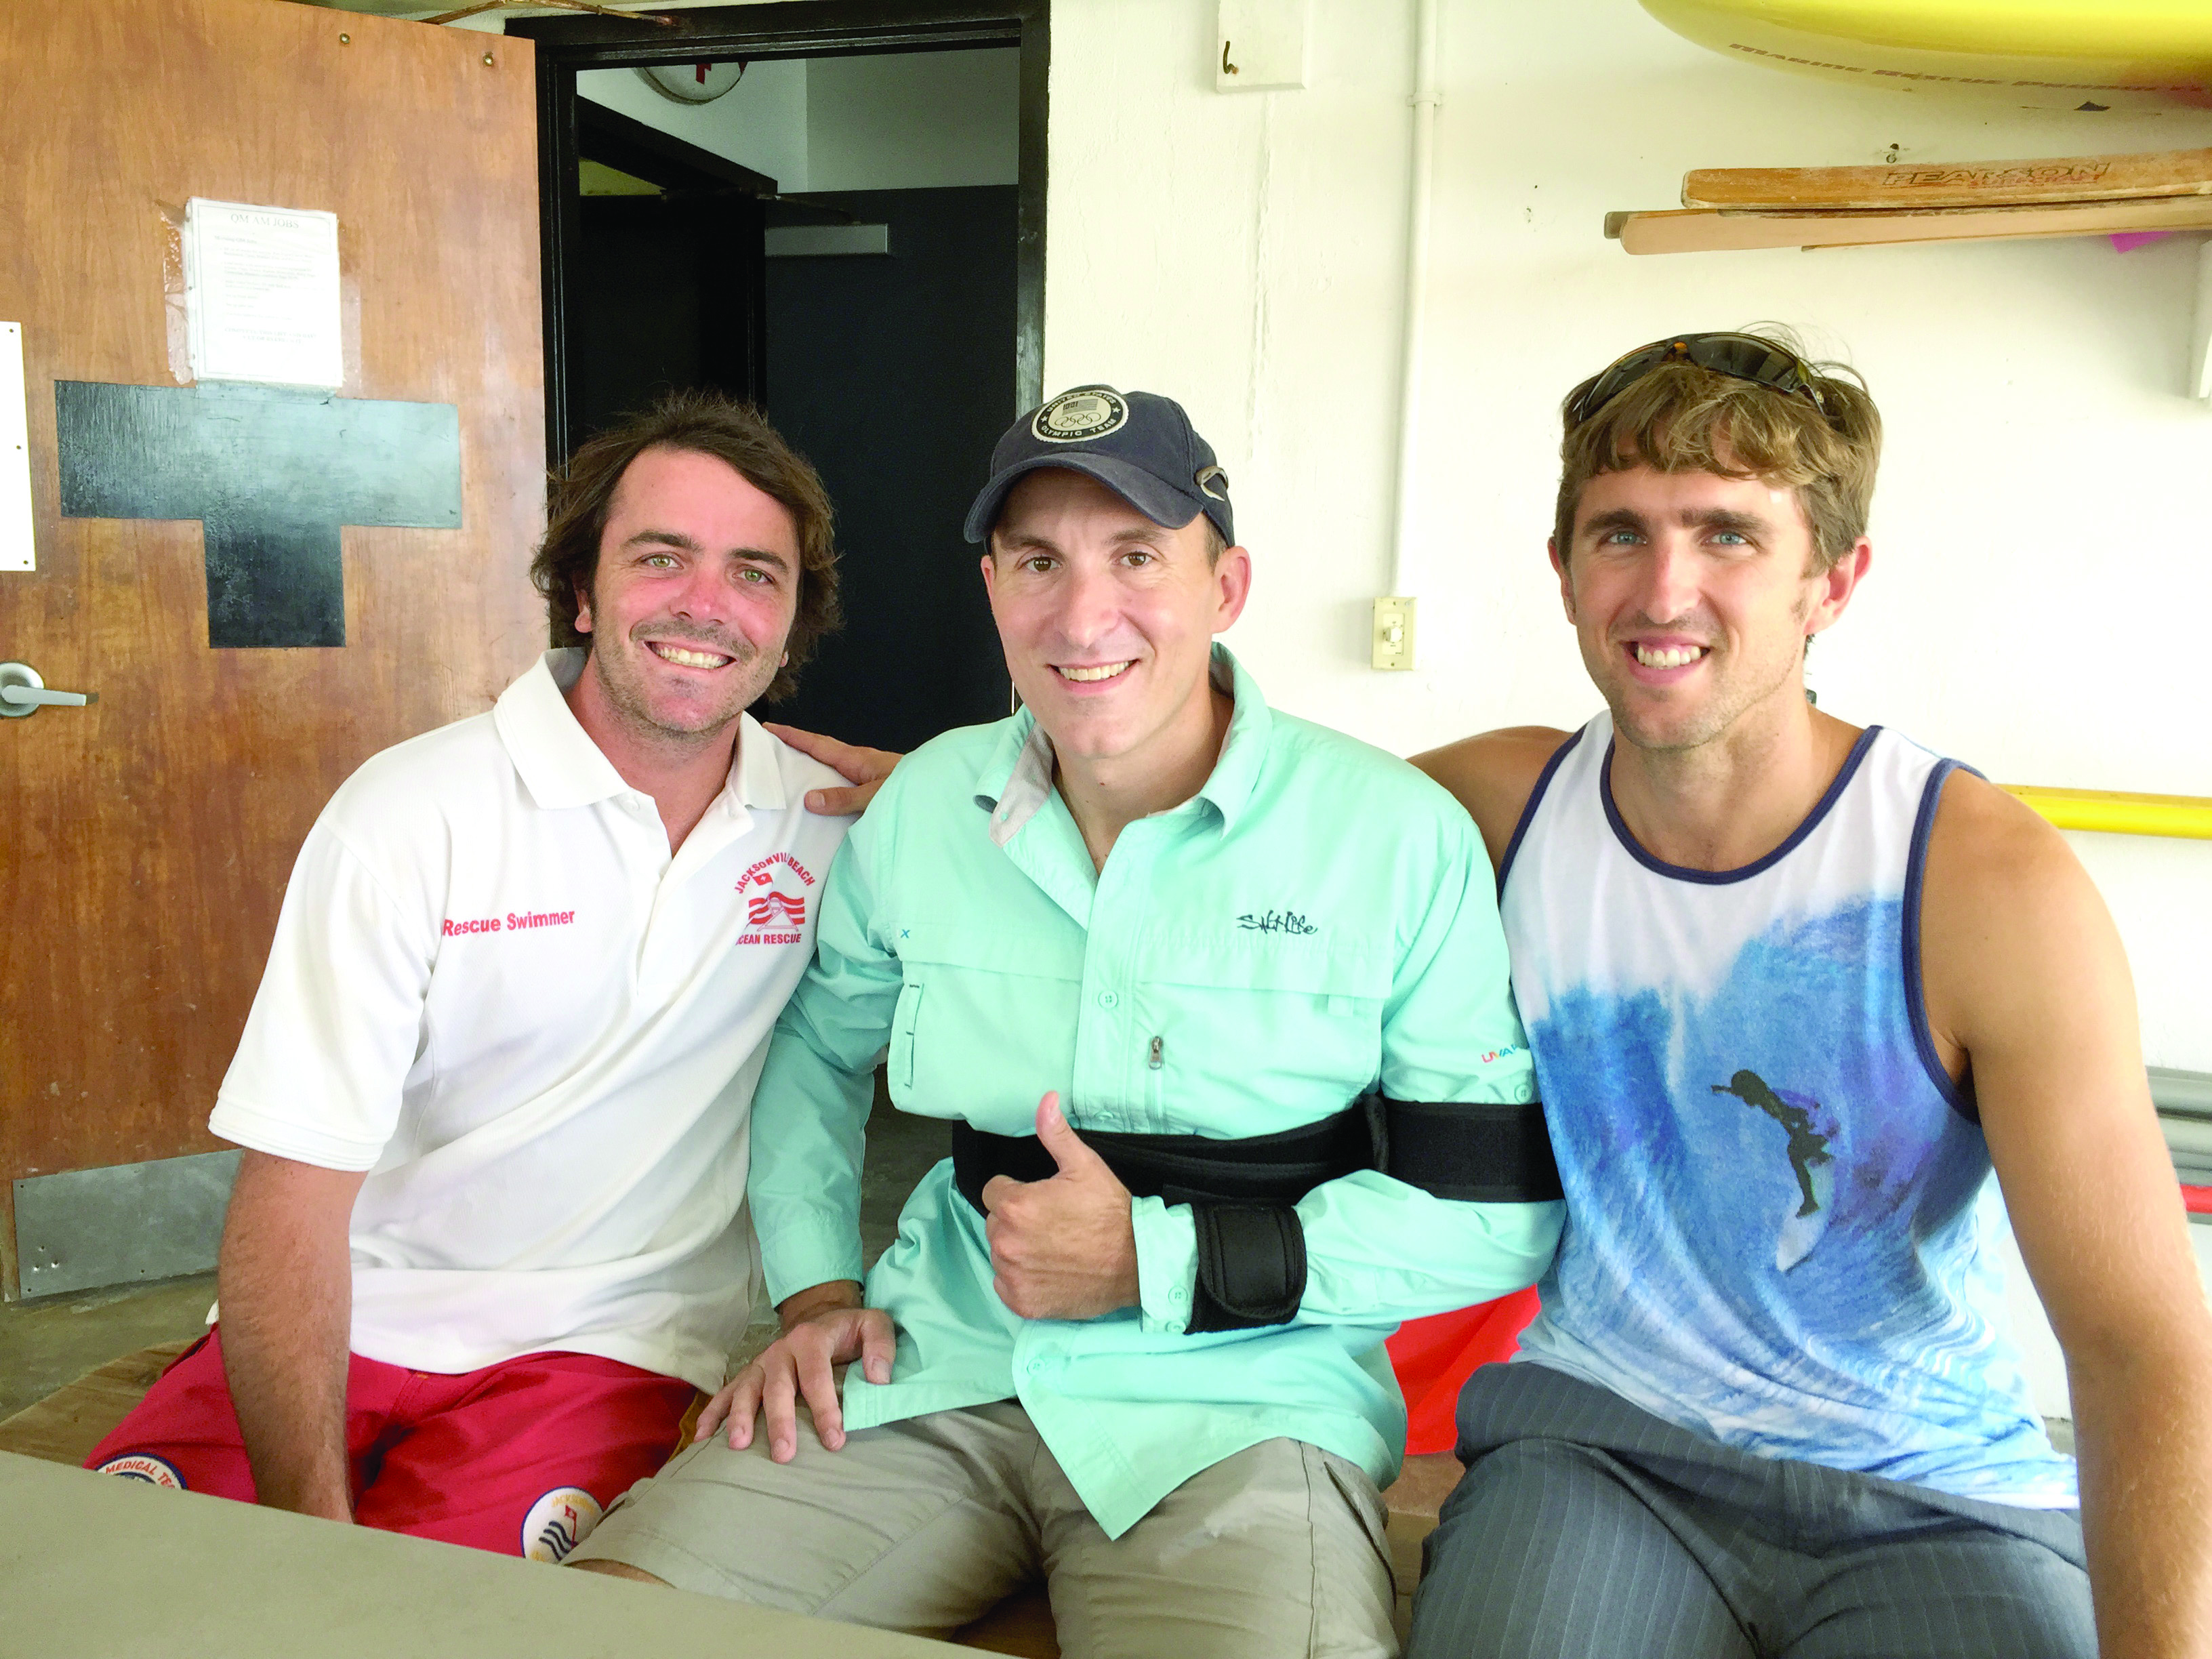 J.R. Bourne (center) flanked by two of his lifeguard
            rescuers, Gordy Van Dusen (left) and Ross Ghiotto (right).